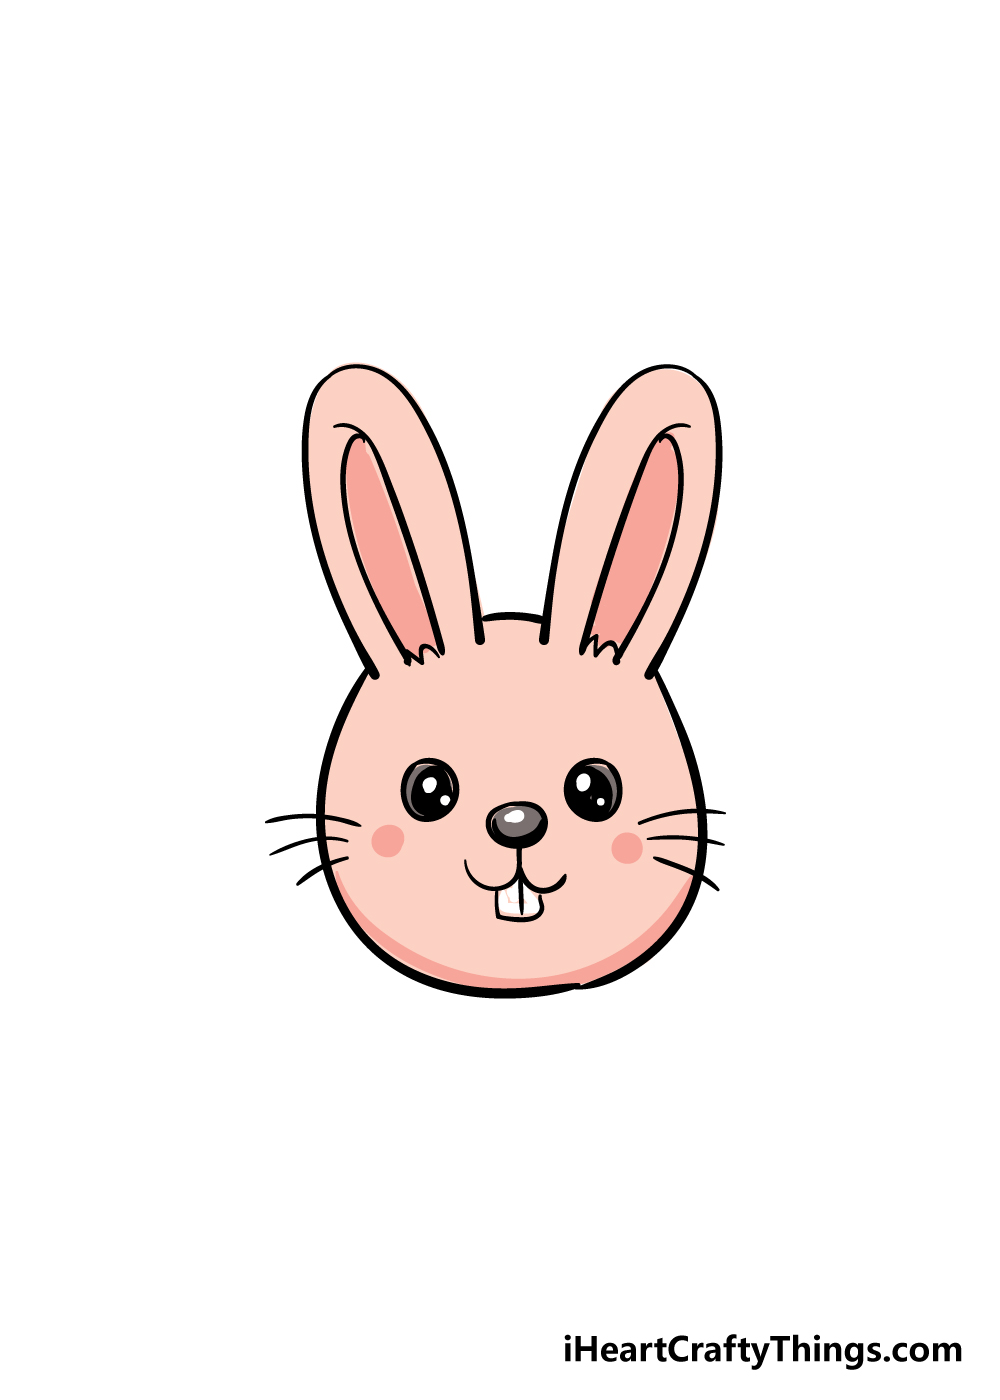 How to Draw A Bunny Face – A Step by Step Guide